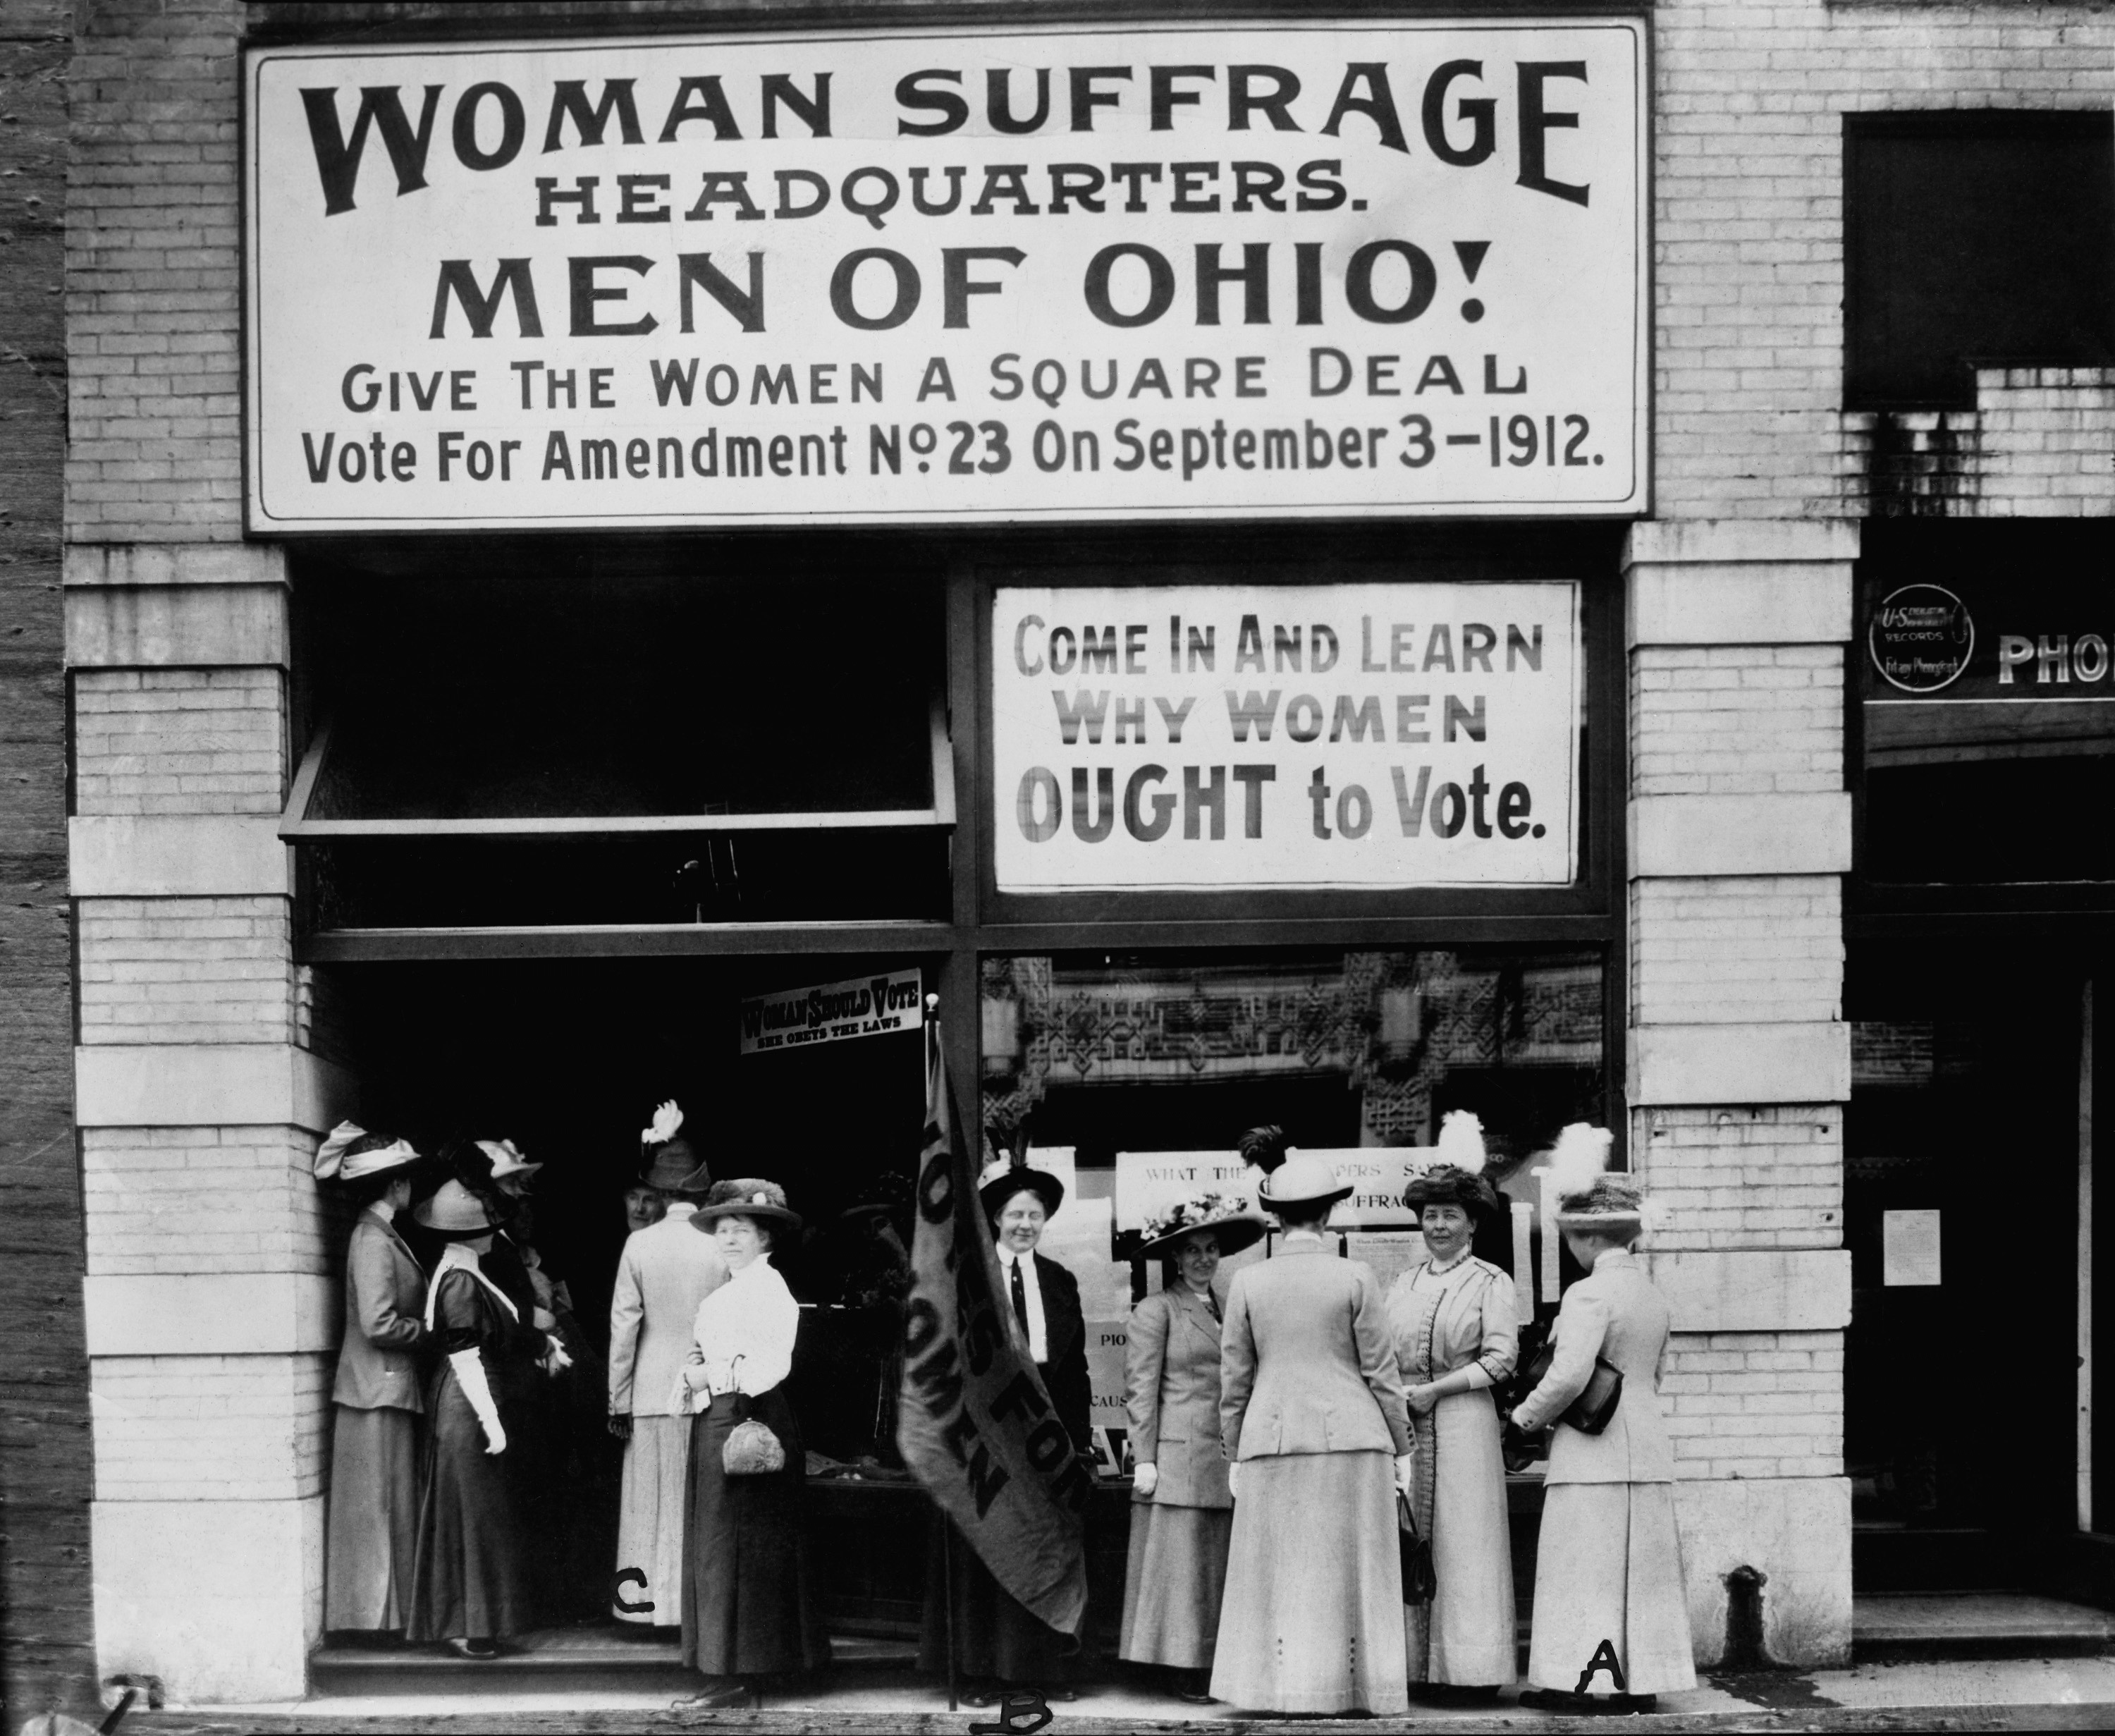 Grandma was a suffrage baby Celebrating family and milestones during Womens History Month image pic